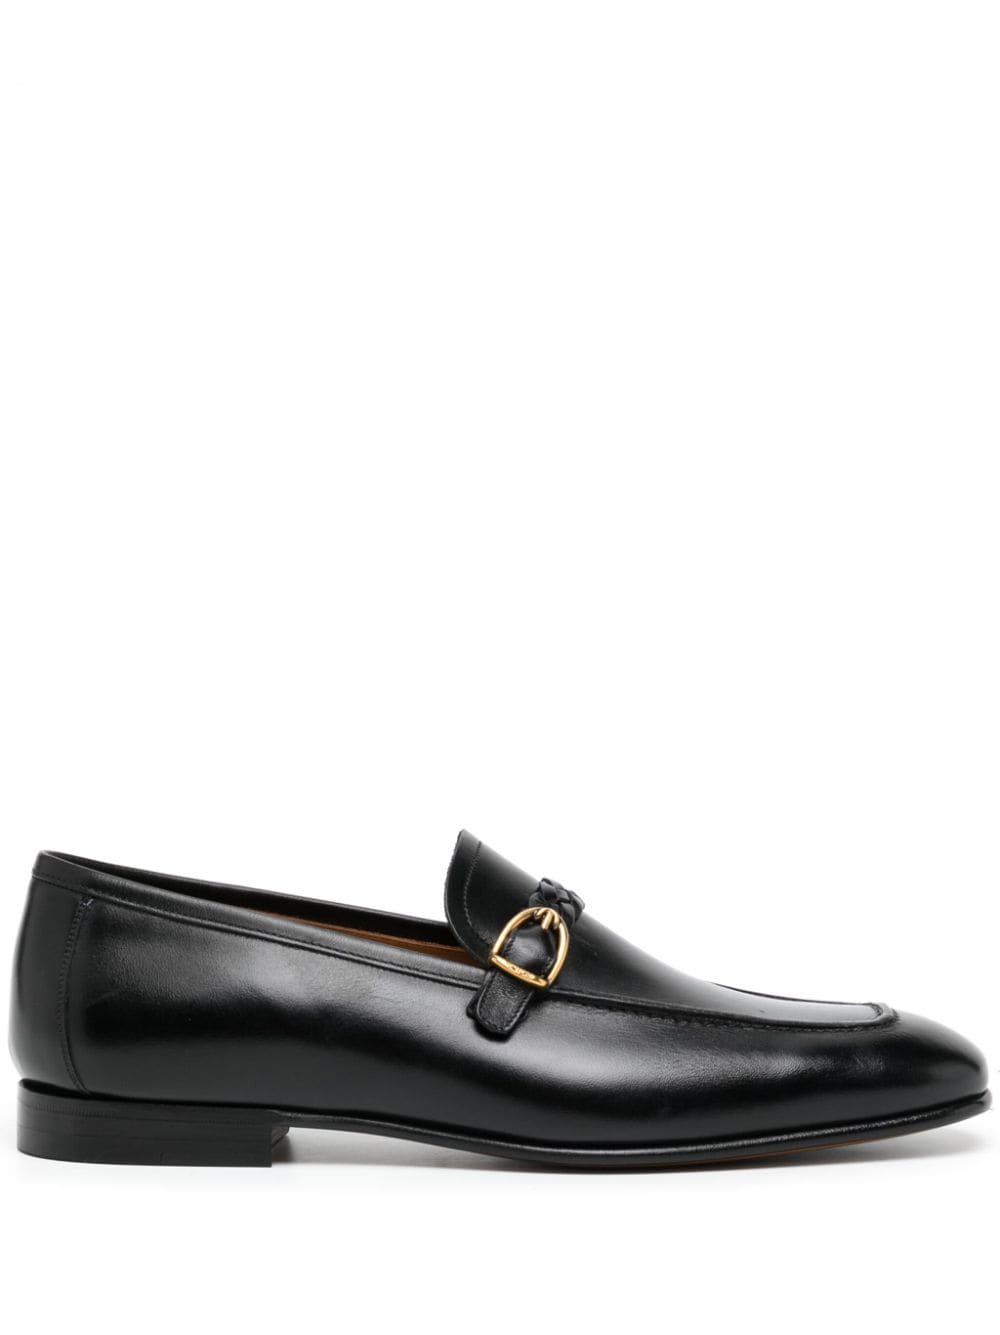 TOM FORD Martin woven-strap leather loafers - Black von TOM FORD